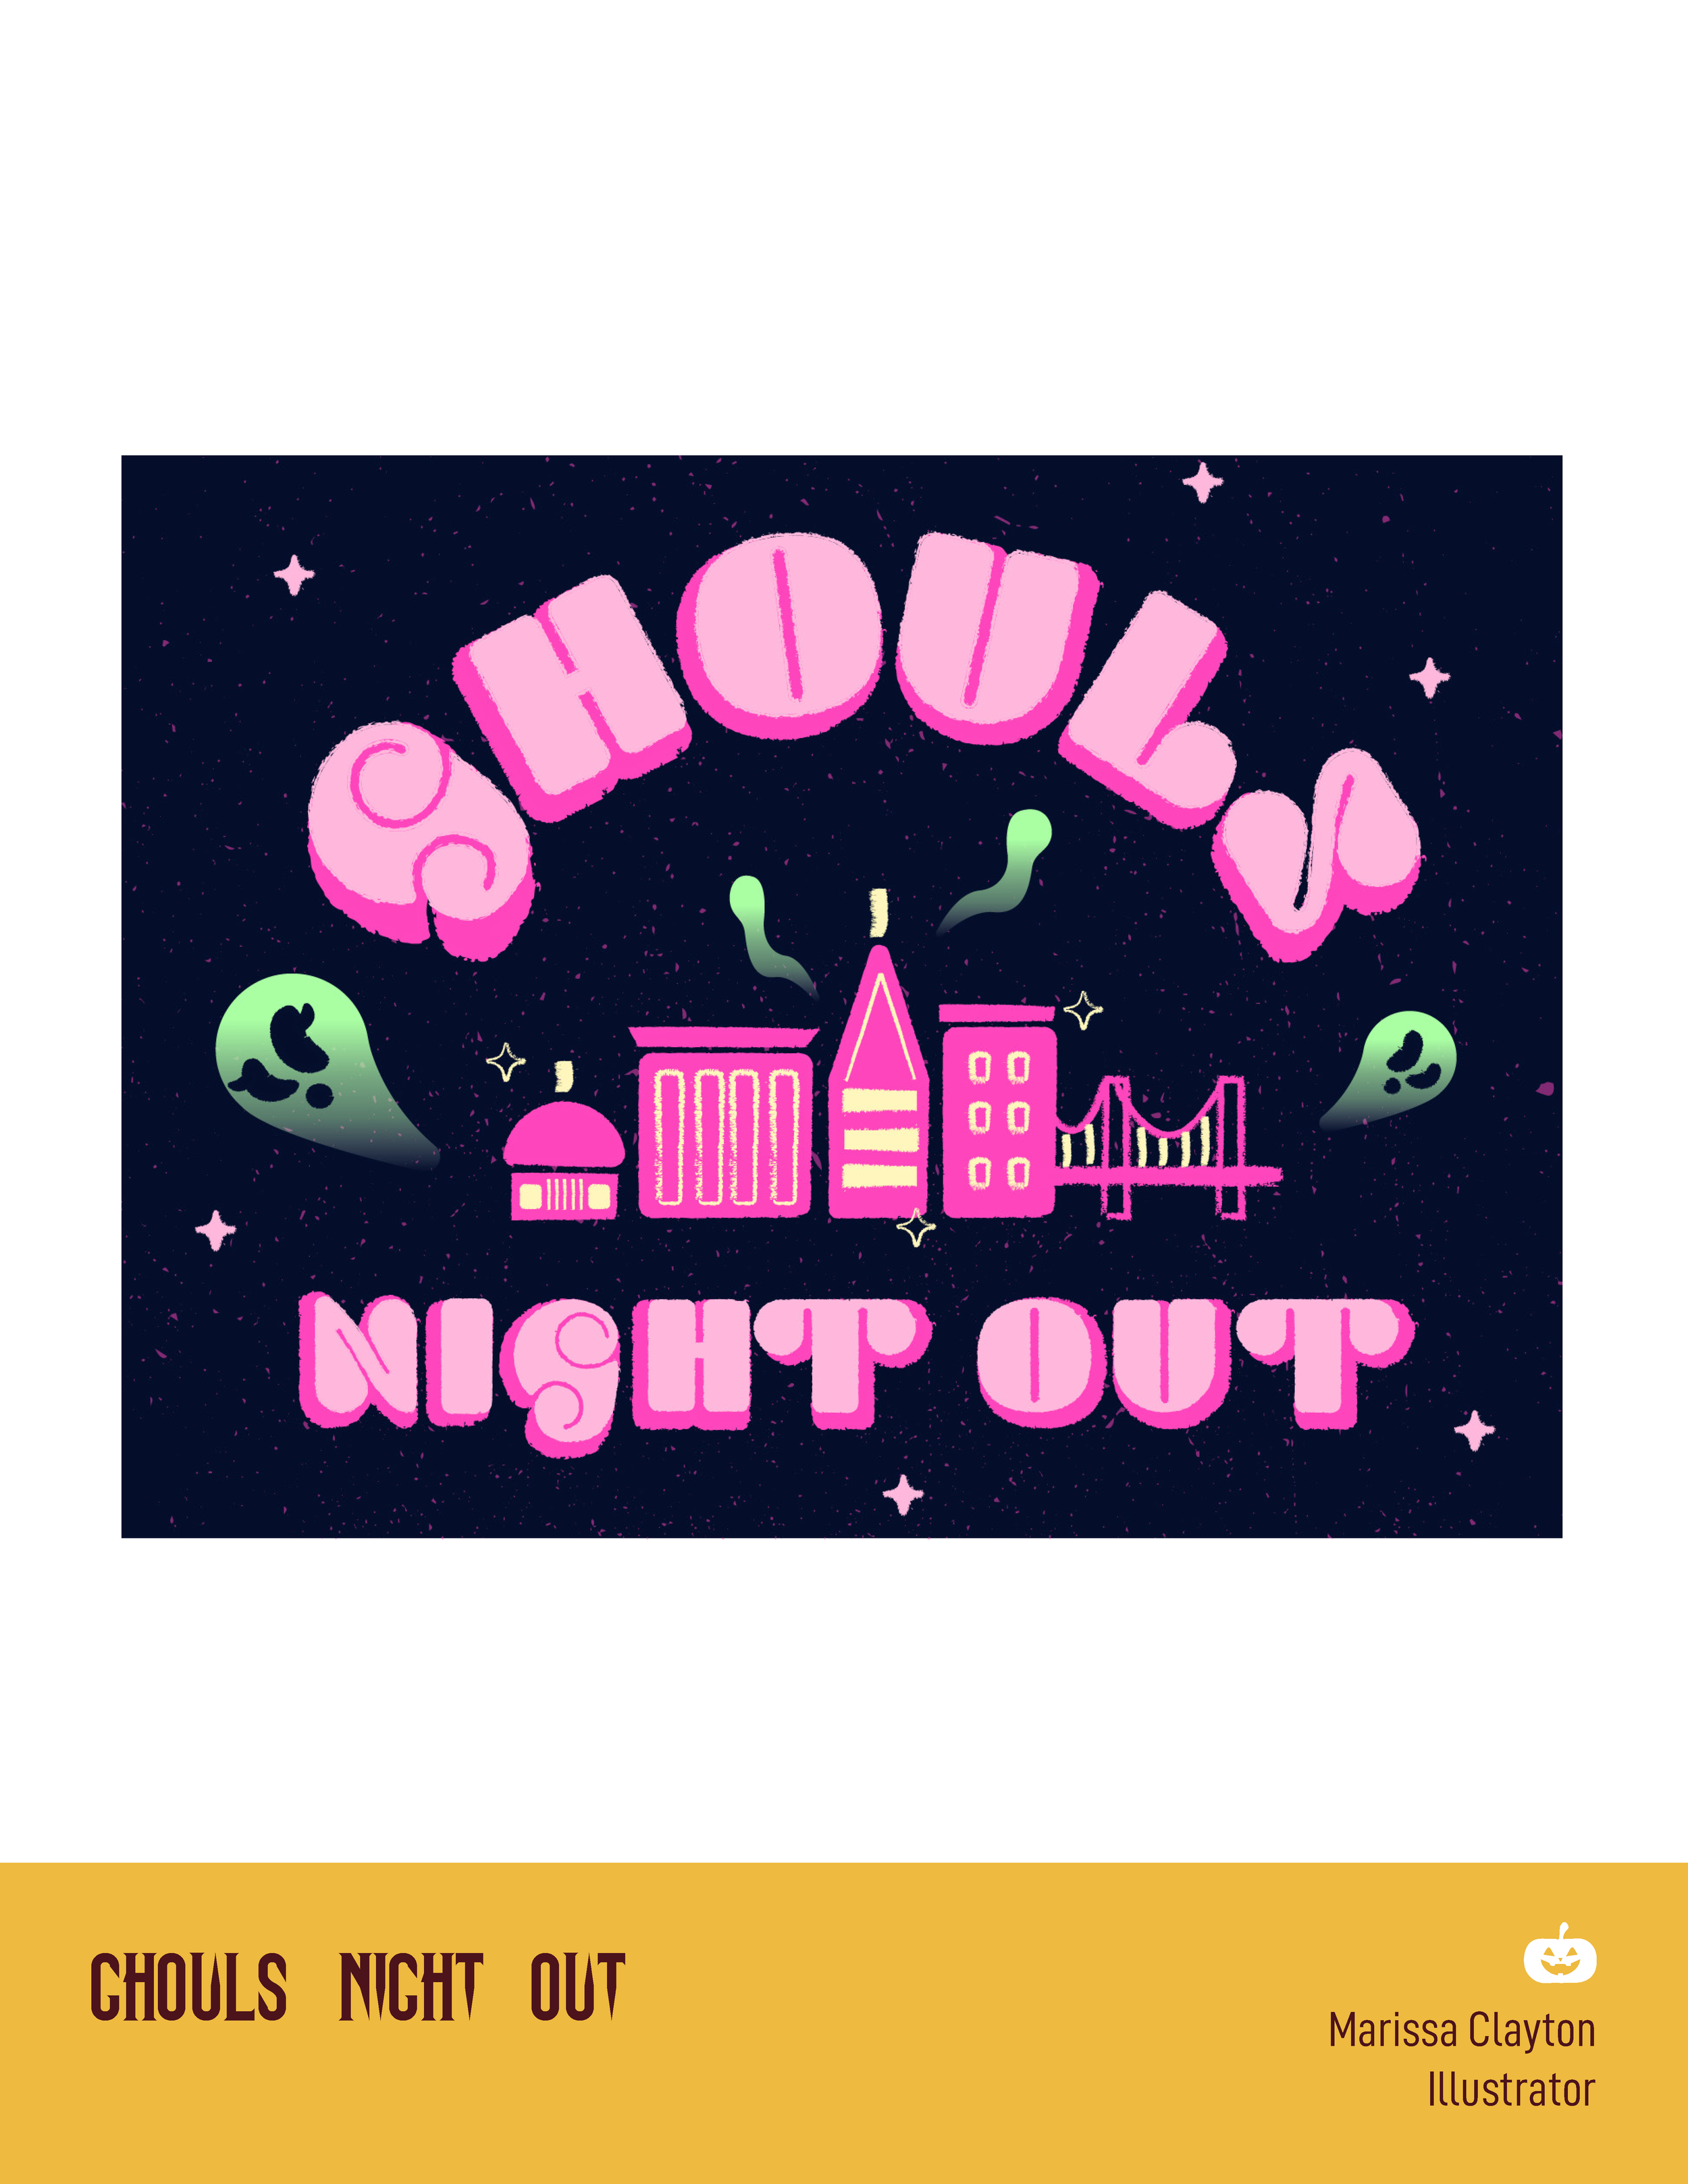 Ghouls Night Out by Marissa Clayton